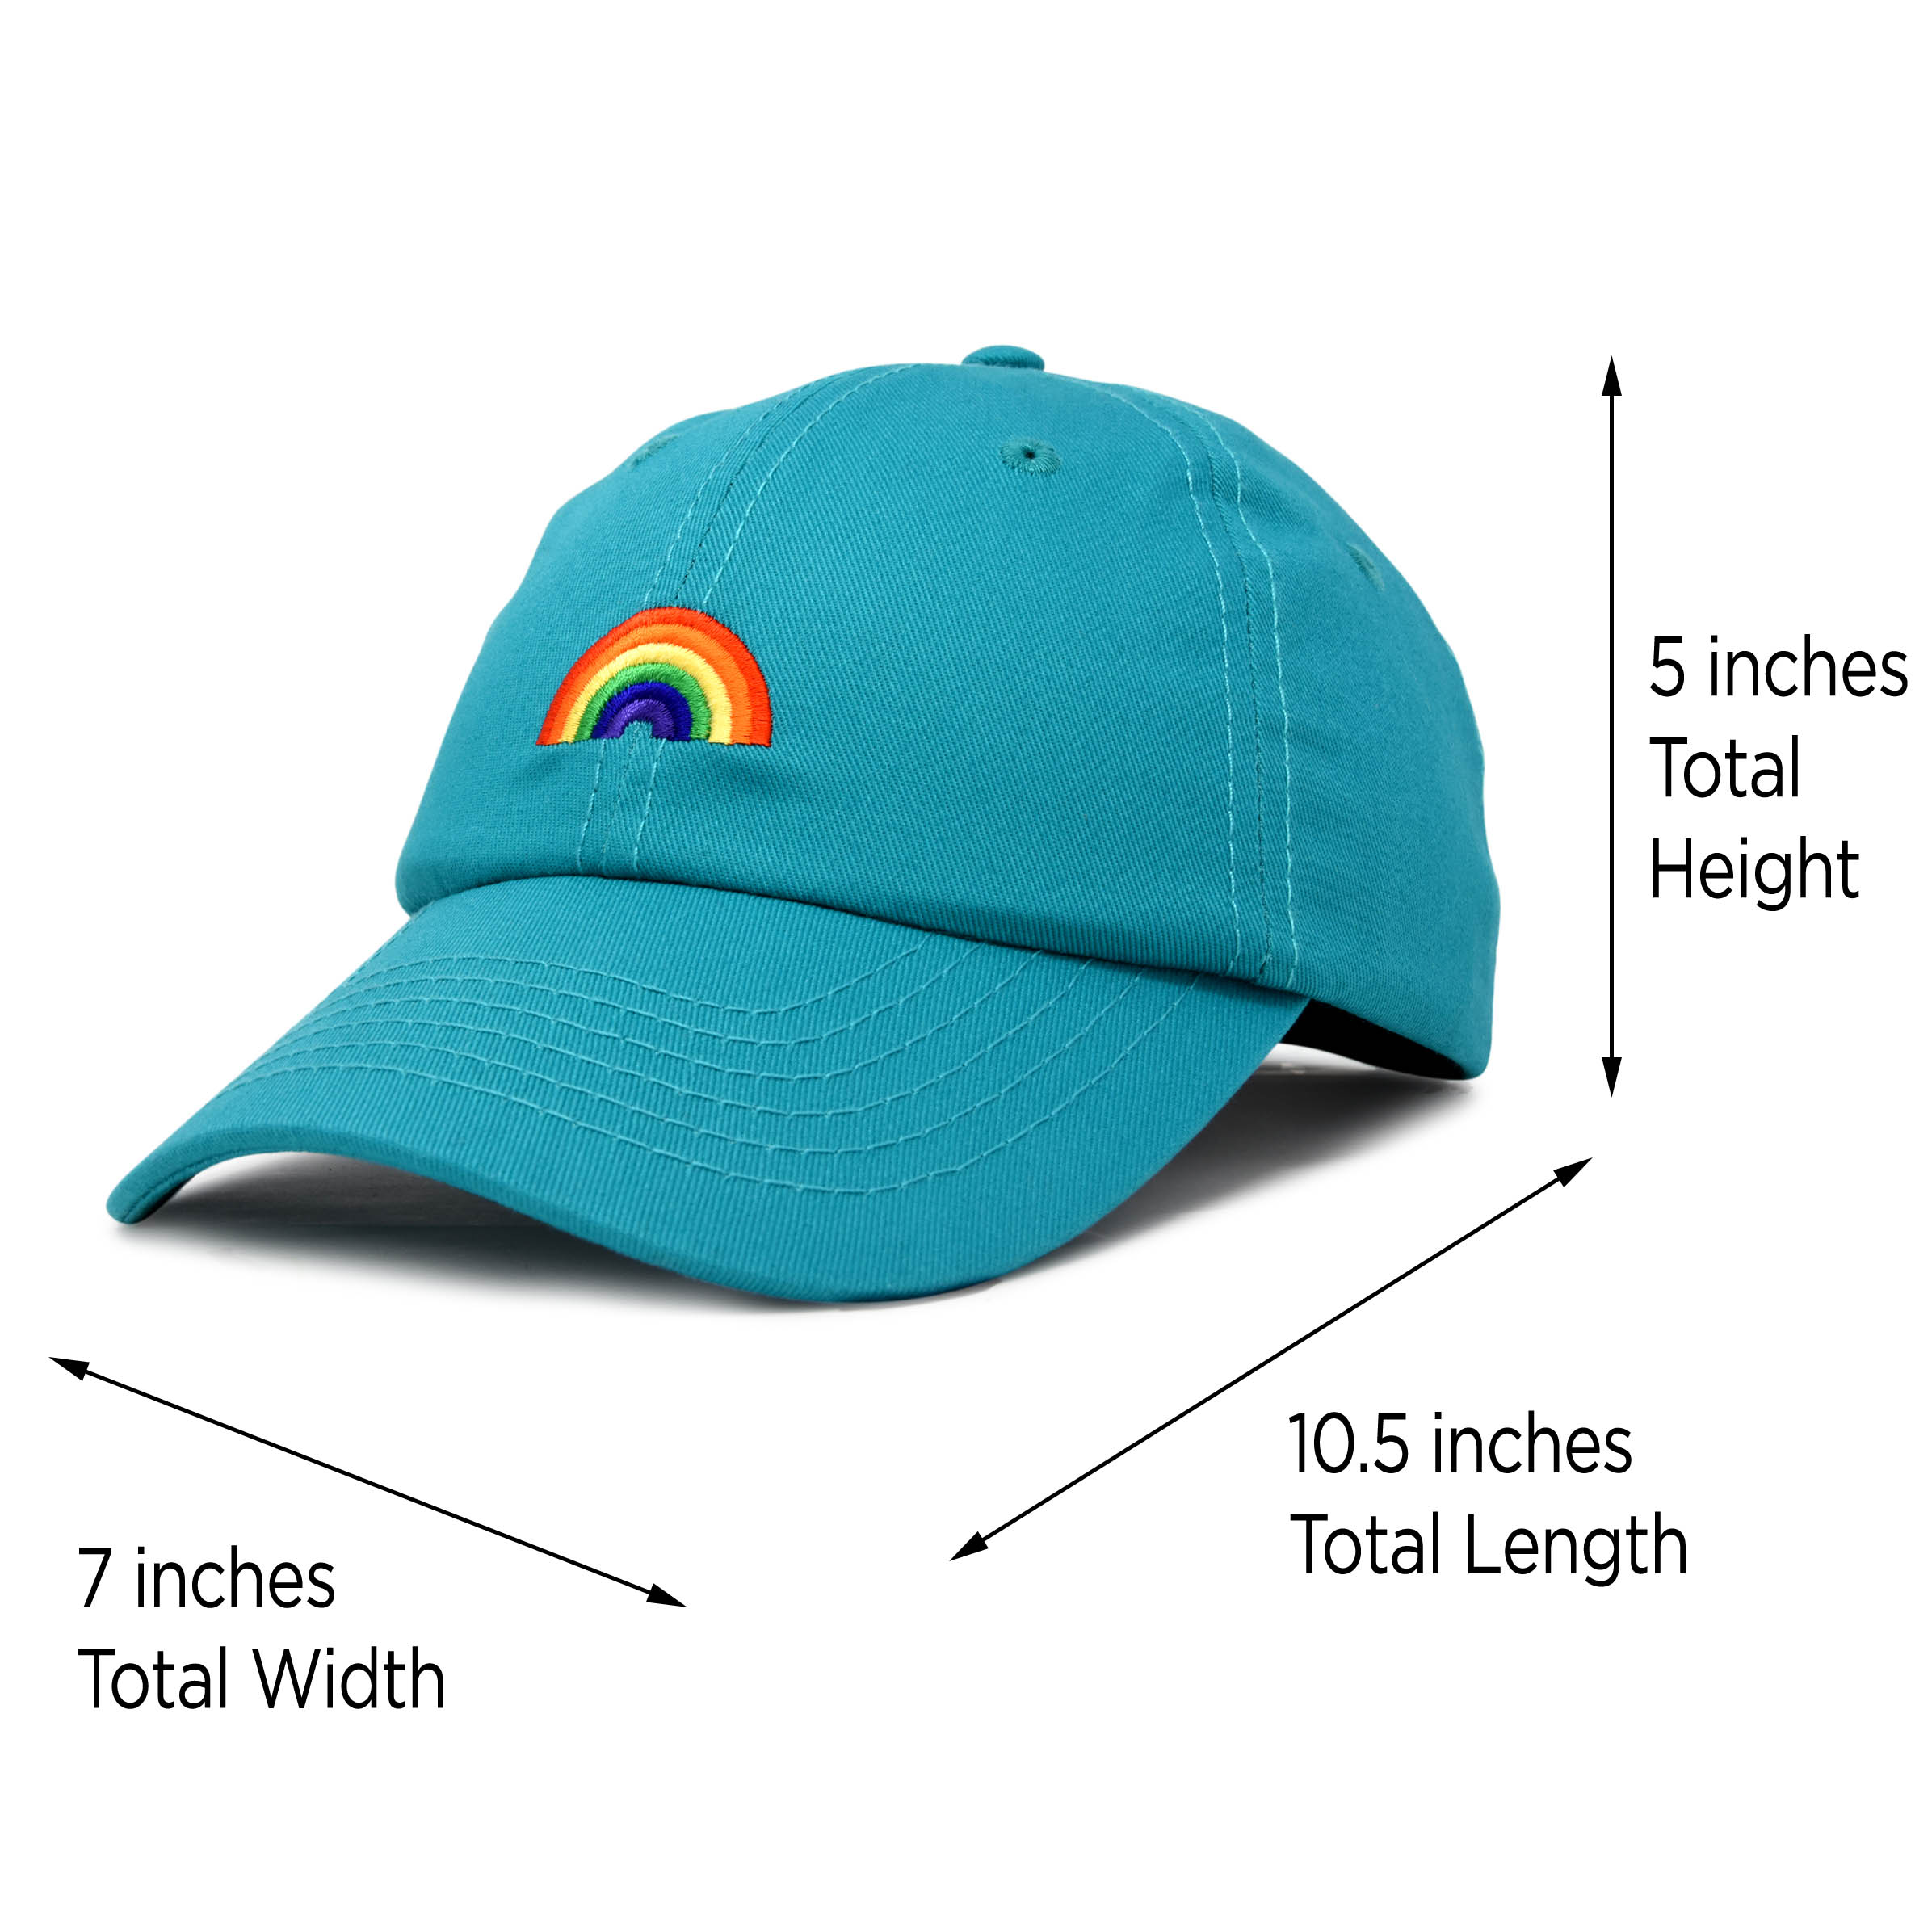 DALIX Rainbow Baseball Cap Womens Hats Cute Hat Soft Cotton Caps in Teal - image 3 of 7